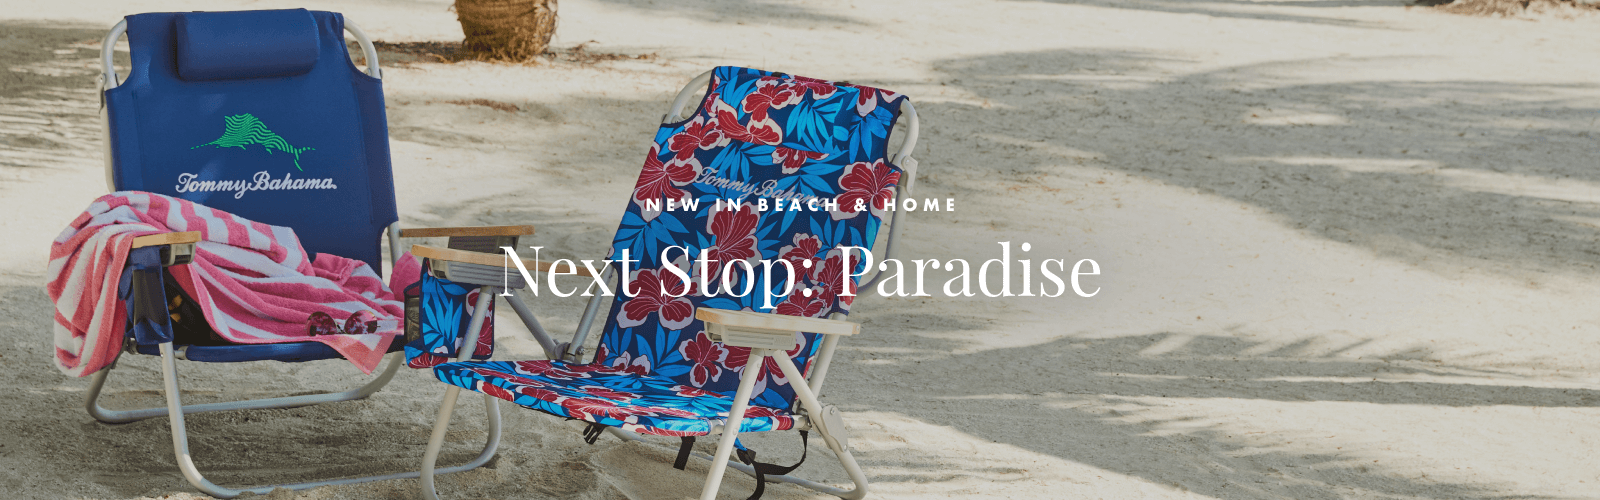 New In Beach & Home: Next Stop: Paradise